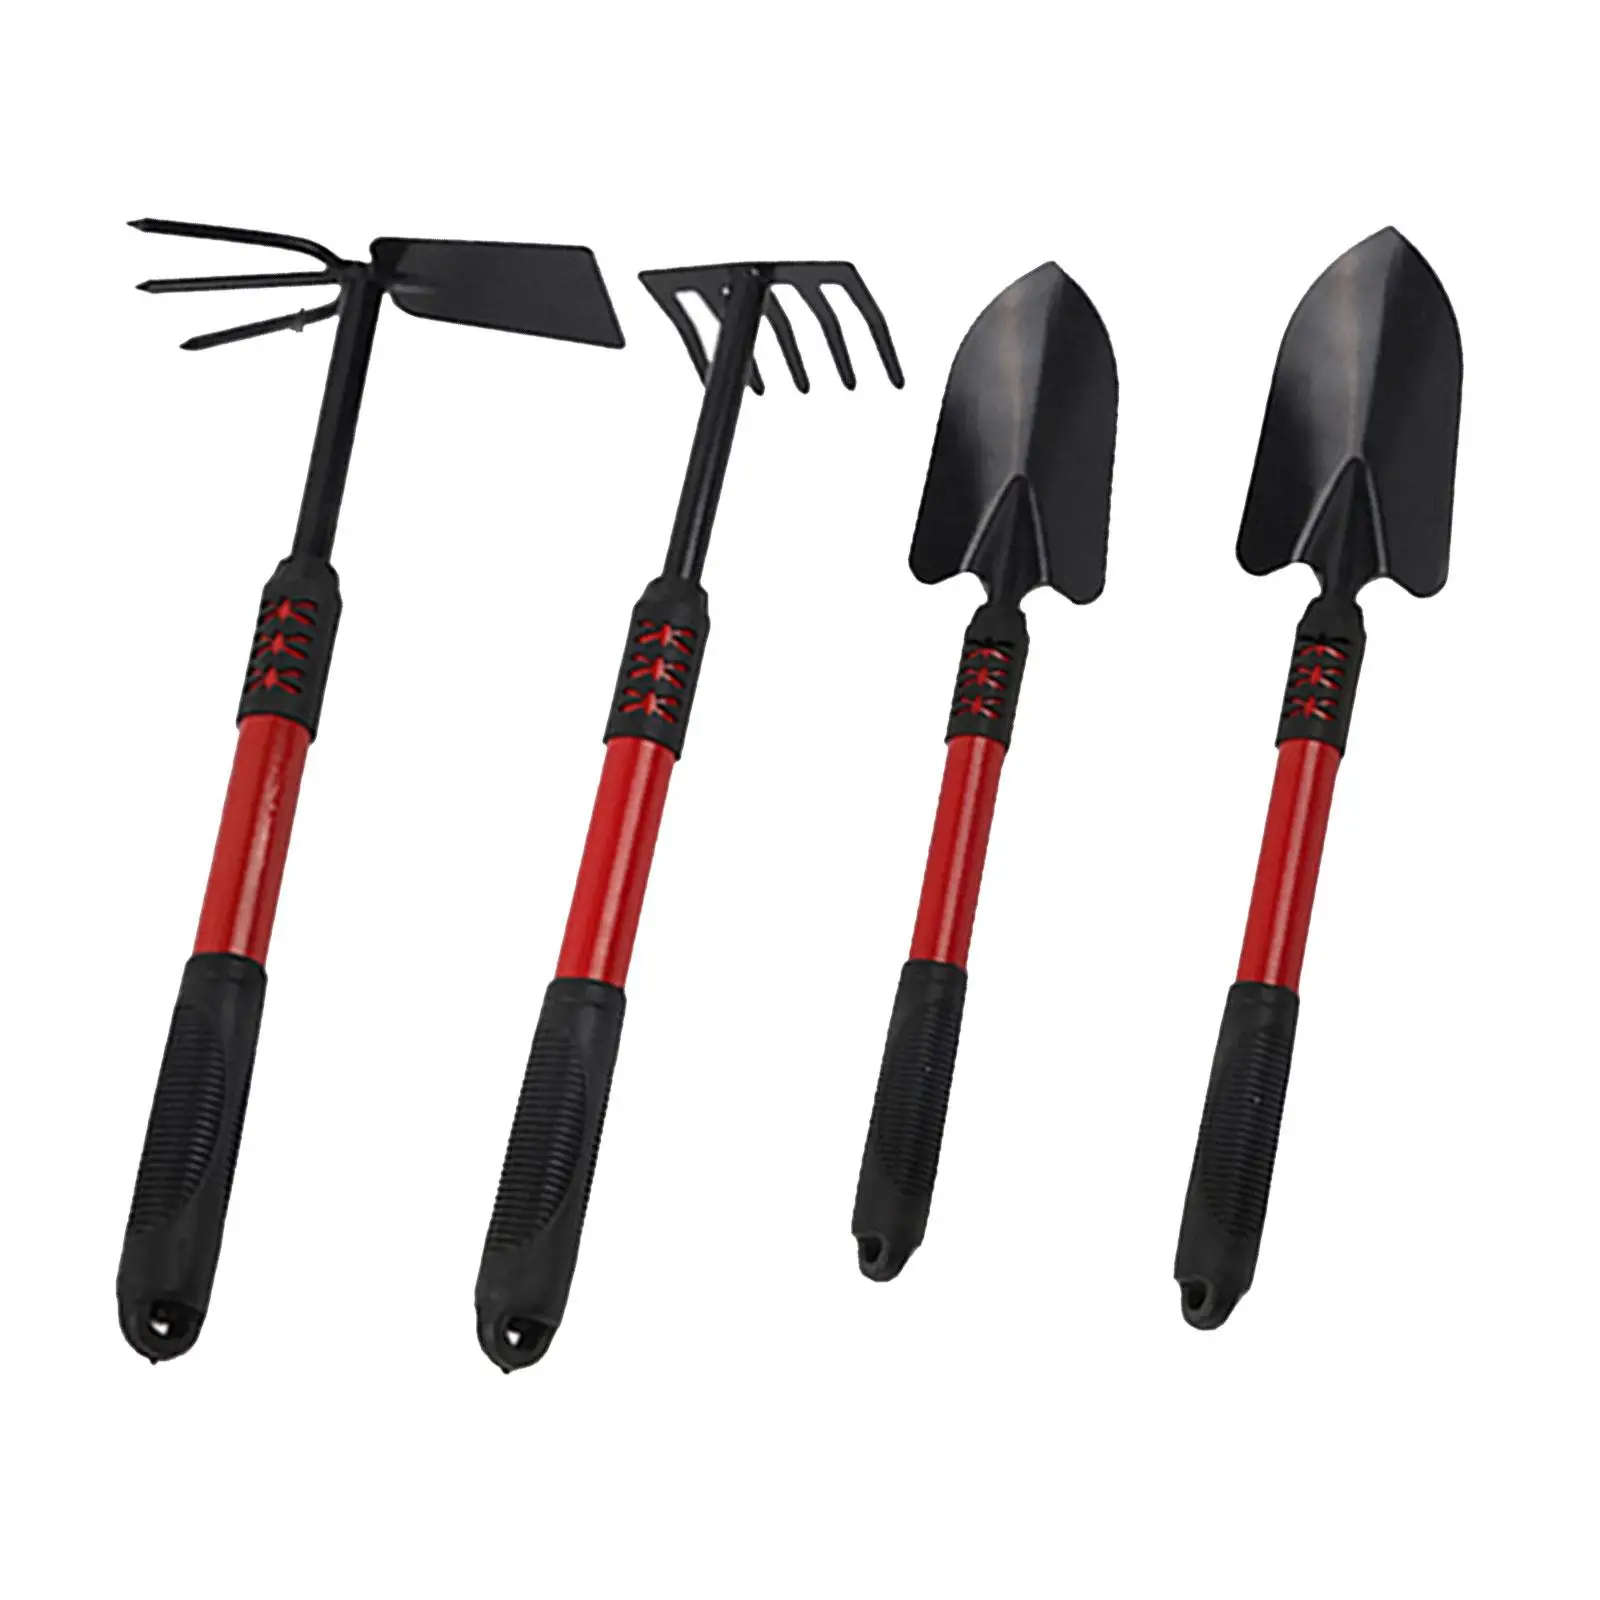 4 Pieces Gardening Tool Kits Durable Heavy Duty Garden Hoe Cultivator Garden Tool Set for Digging Potted Flowers Loose Ground